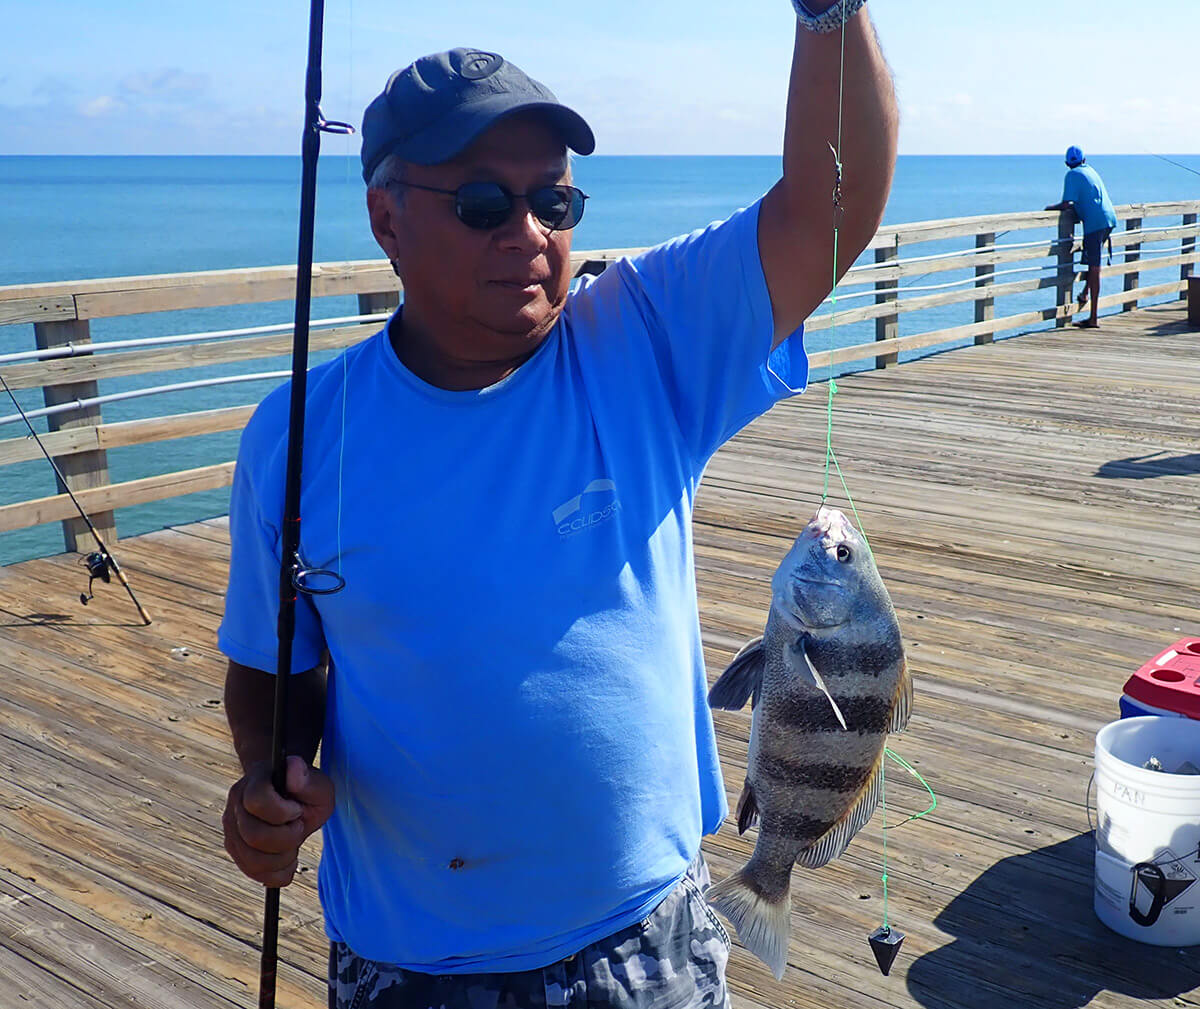 Surf and Pier Fishing Equipment - Florida Watersports